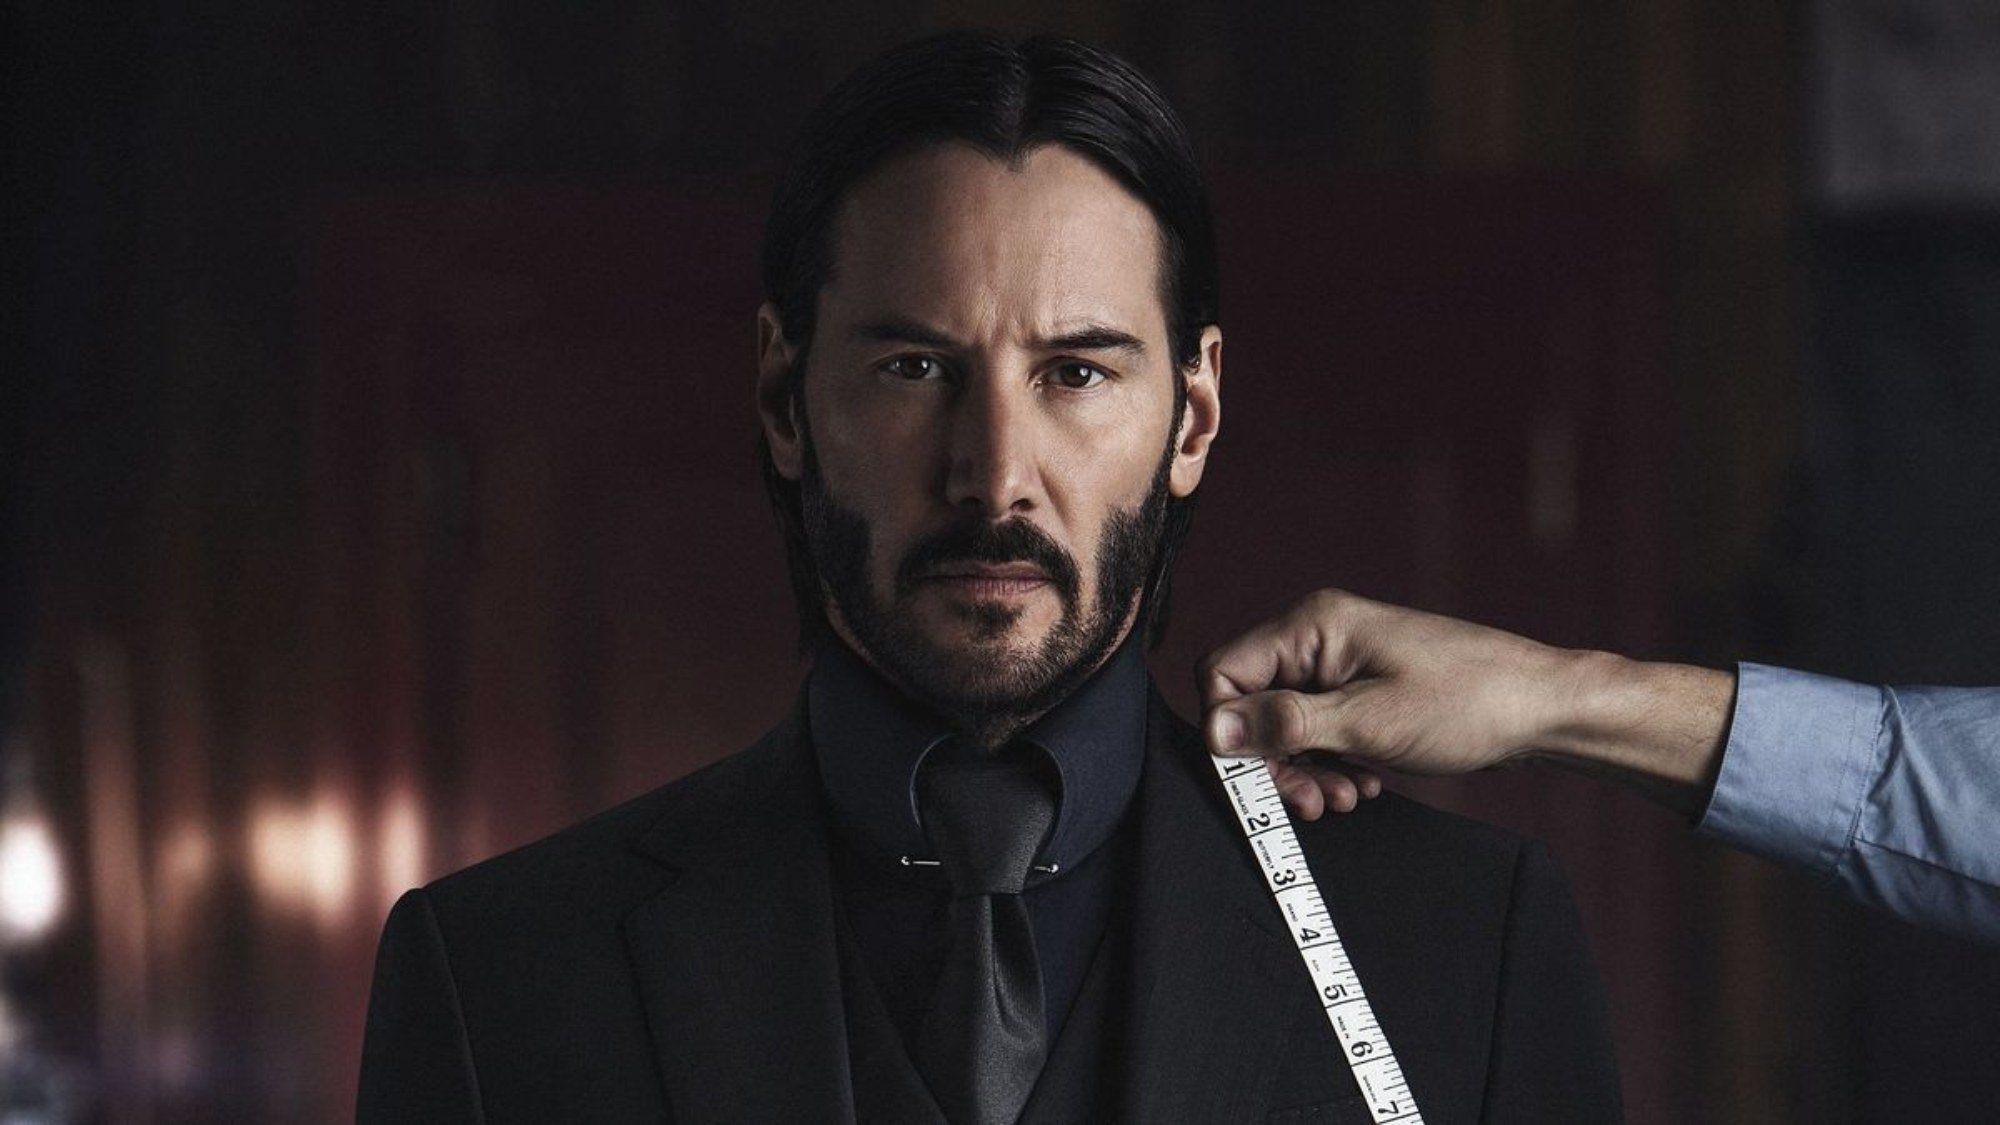 'John Wick: Chapter 2' Keanu Reeves as John Wick looking straight ahead wearing a suit with a hand in the frame tailoring the suit with a measuring tape.